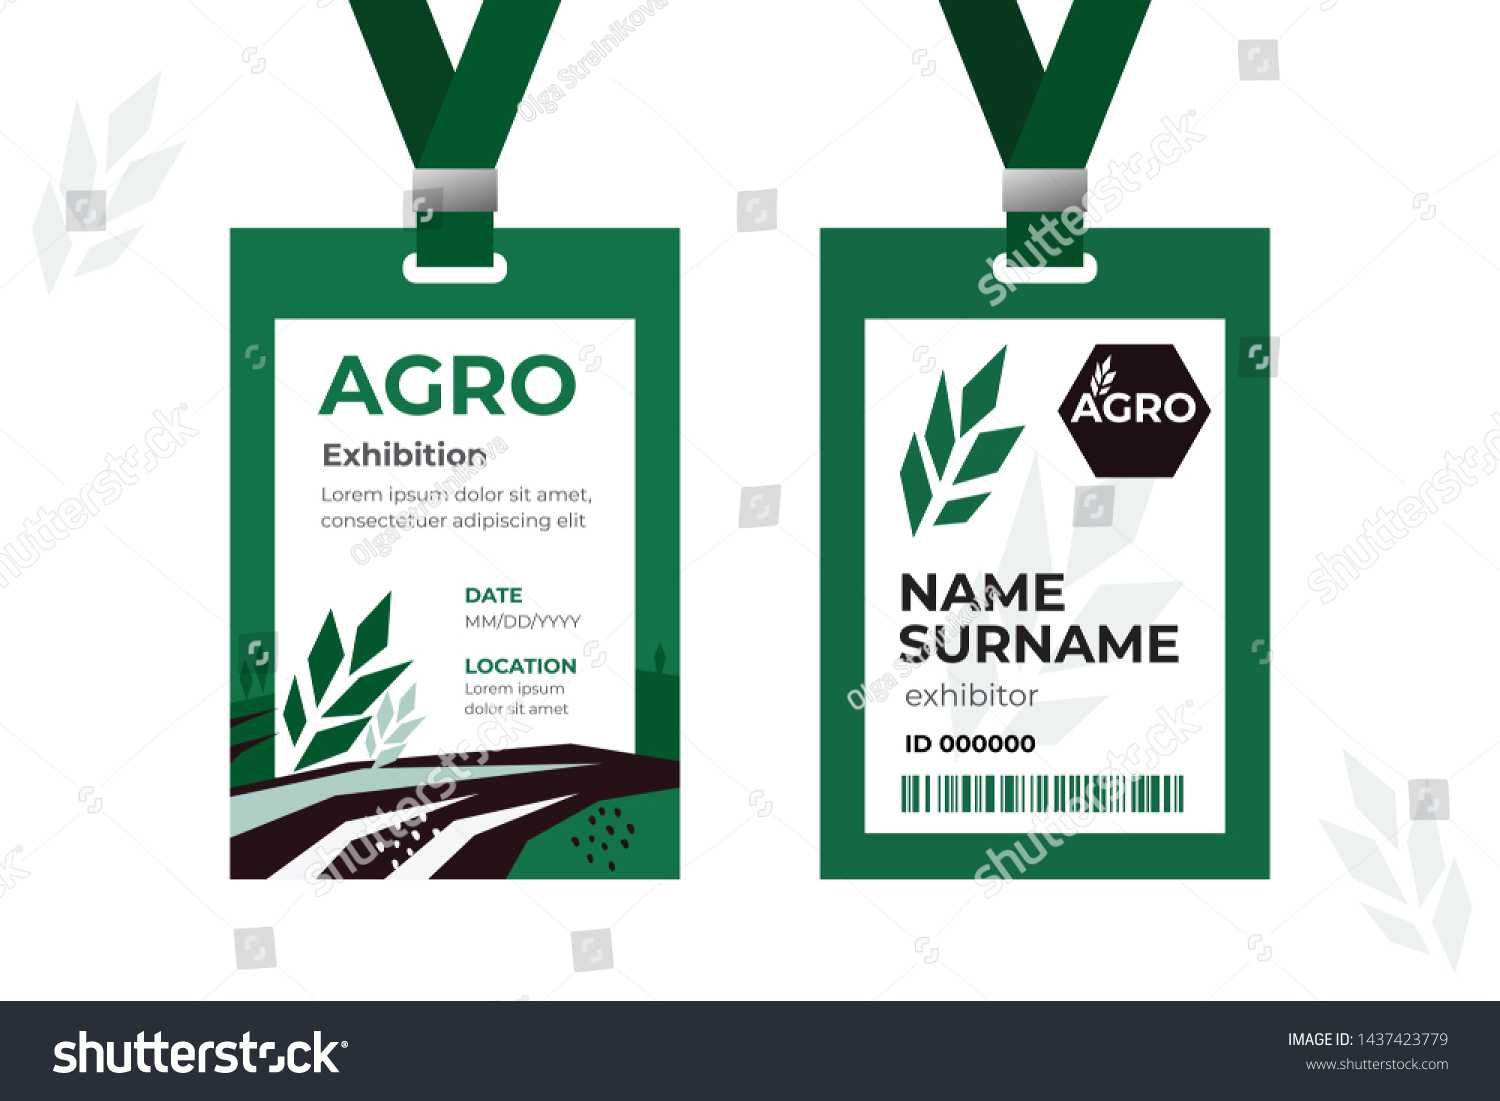 Vector Template Id Card Strap Design Stock Image | Download Now Pertaining To Conference Id Card Template